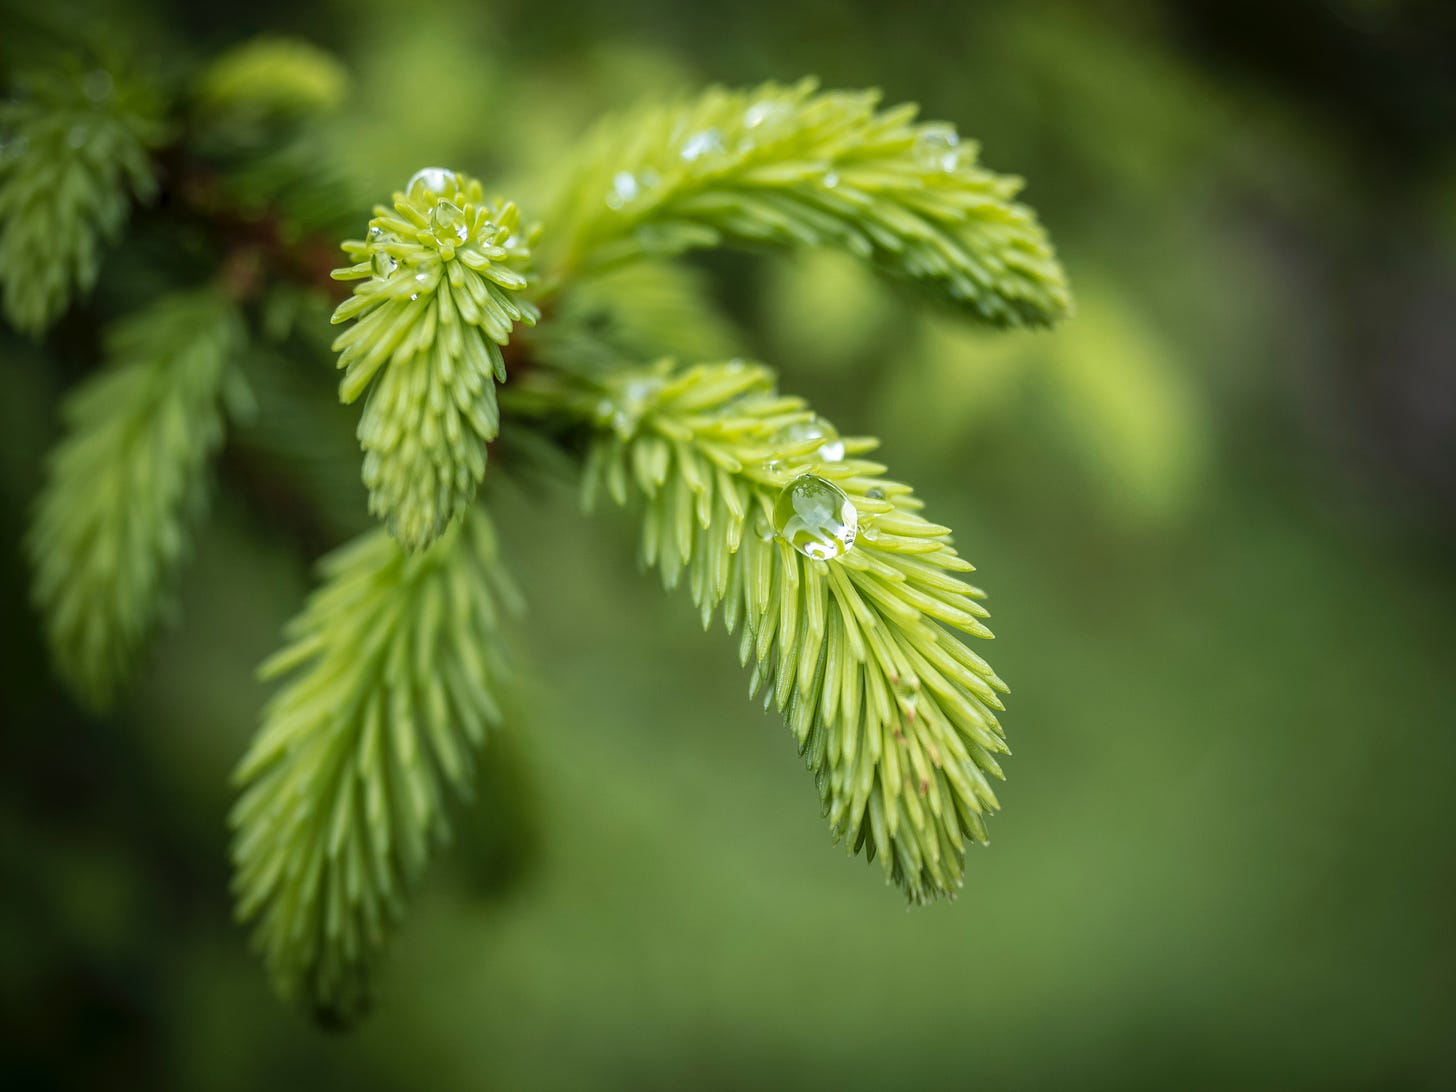 The bright green tips of a spruce branch, with water drops like tears.